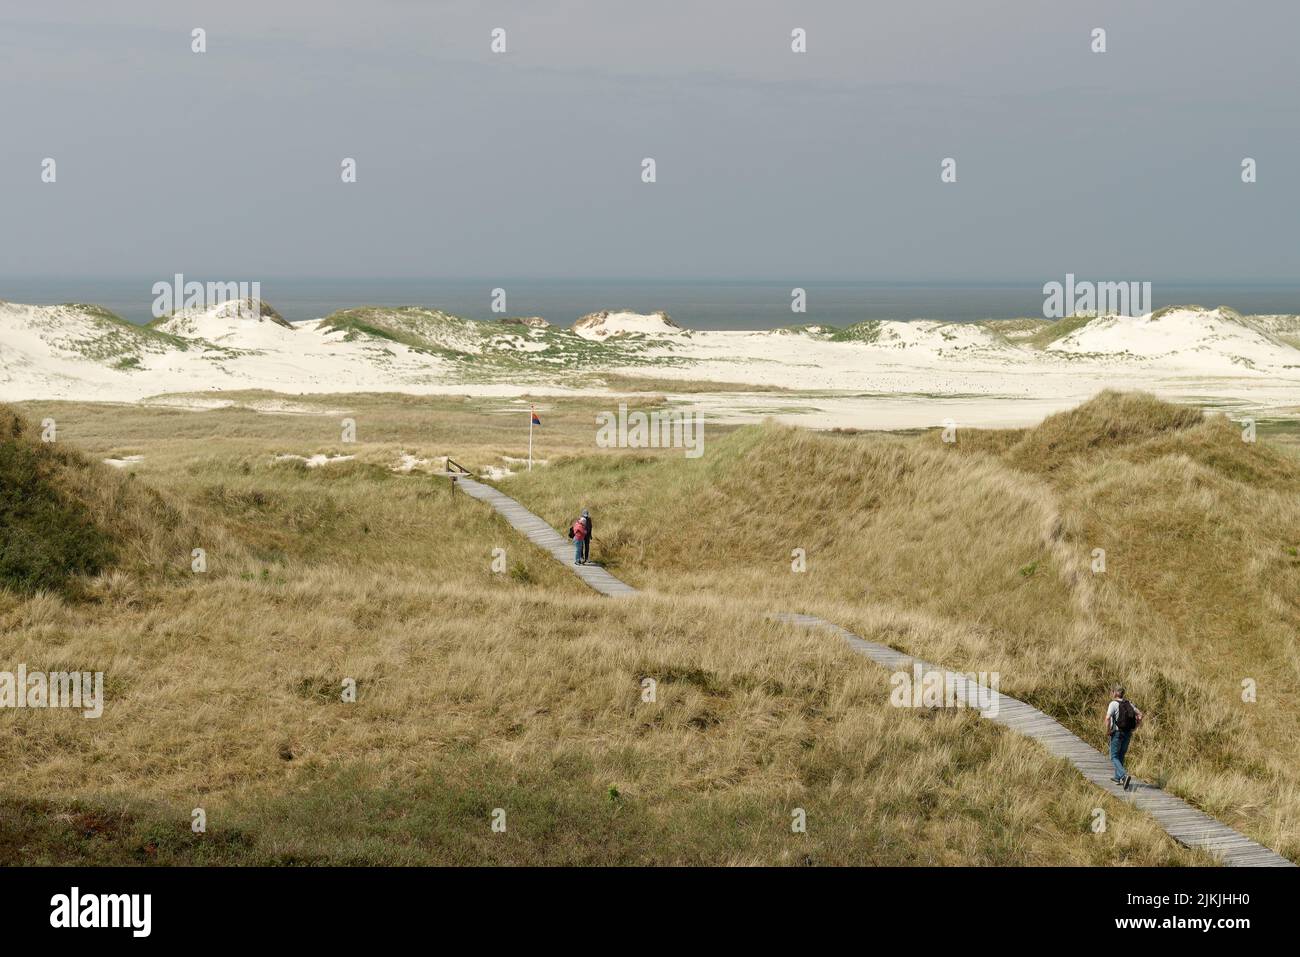 View from the Quermarkenfeuer to the dune landscape near Norddorf, Norddorf, Amrum, North Frisia, North Sea, North Frisian Islands, Wadden Sea National Park, Schleswig- Holstein Wadden Sea National Park, Schleswig-Holstein, Germany Stock Photo